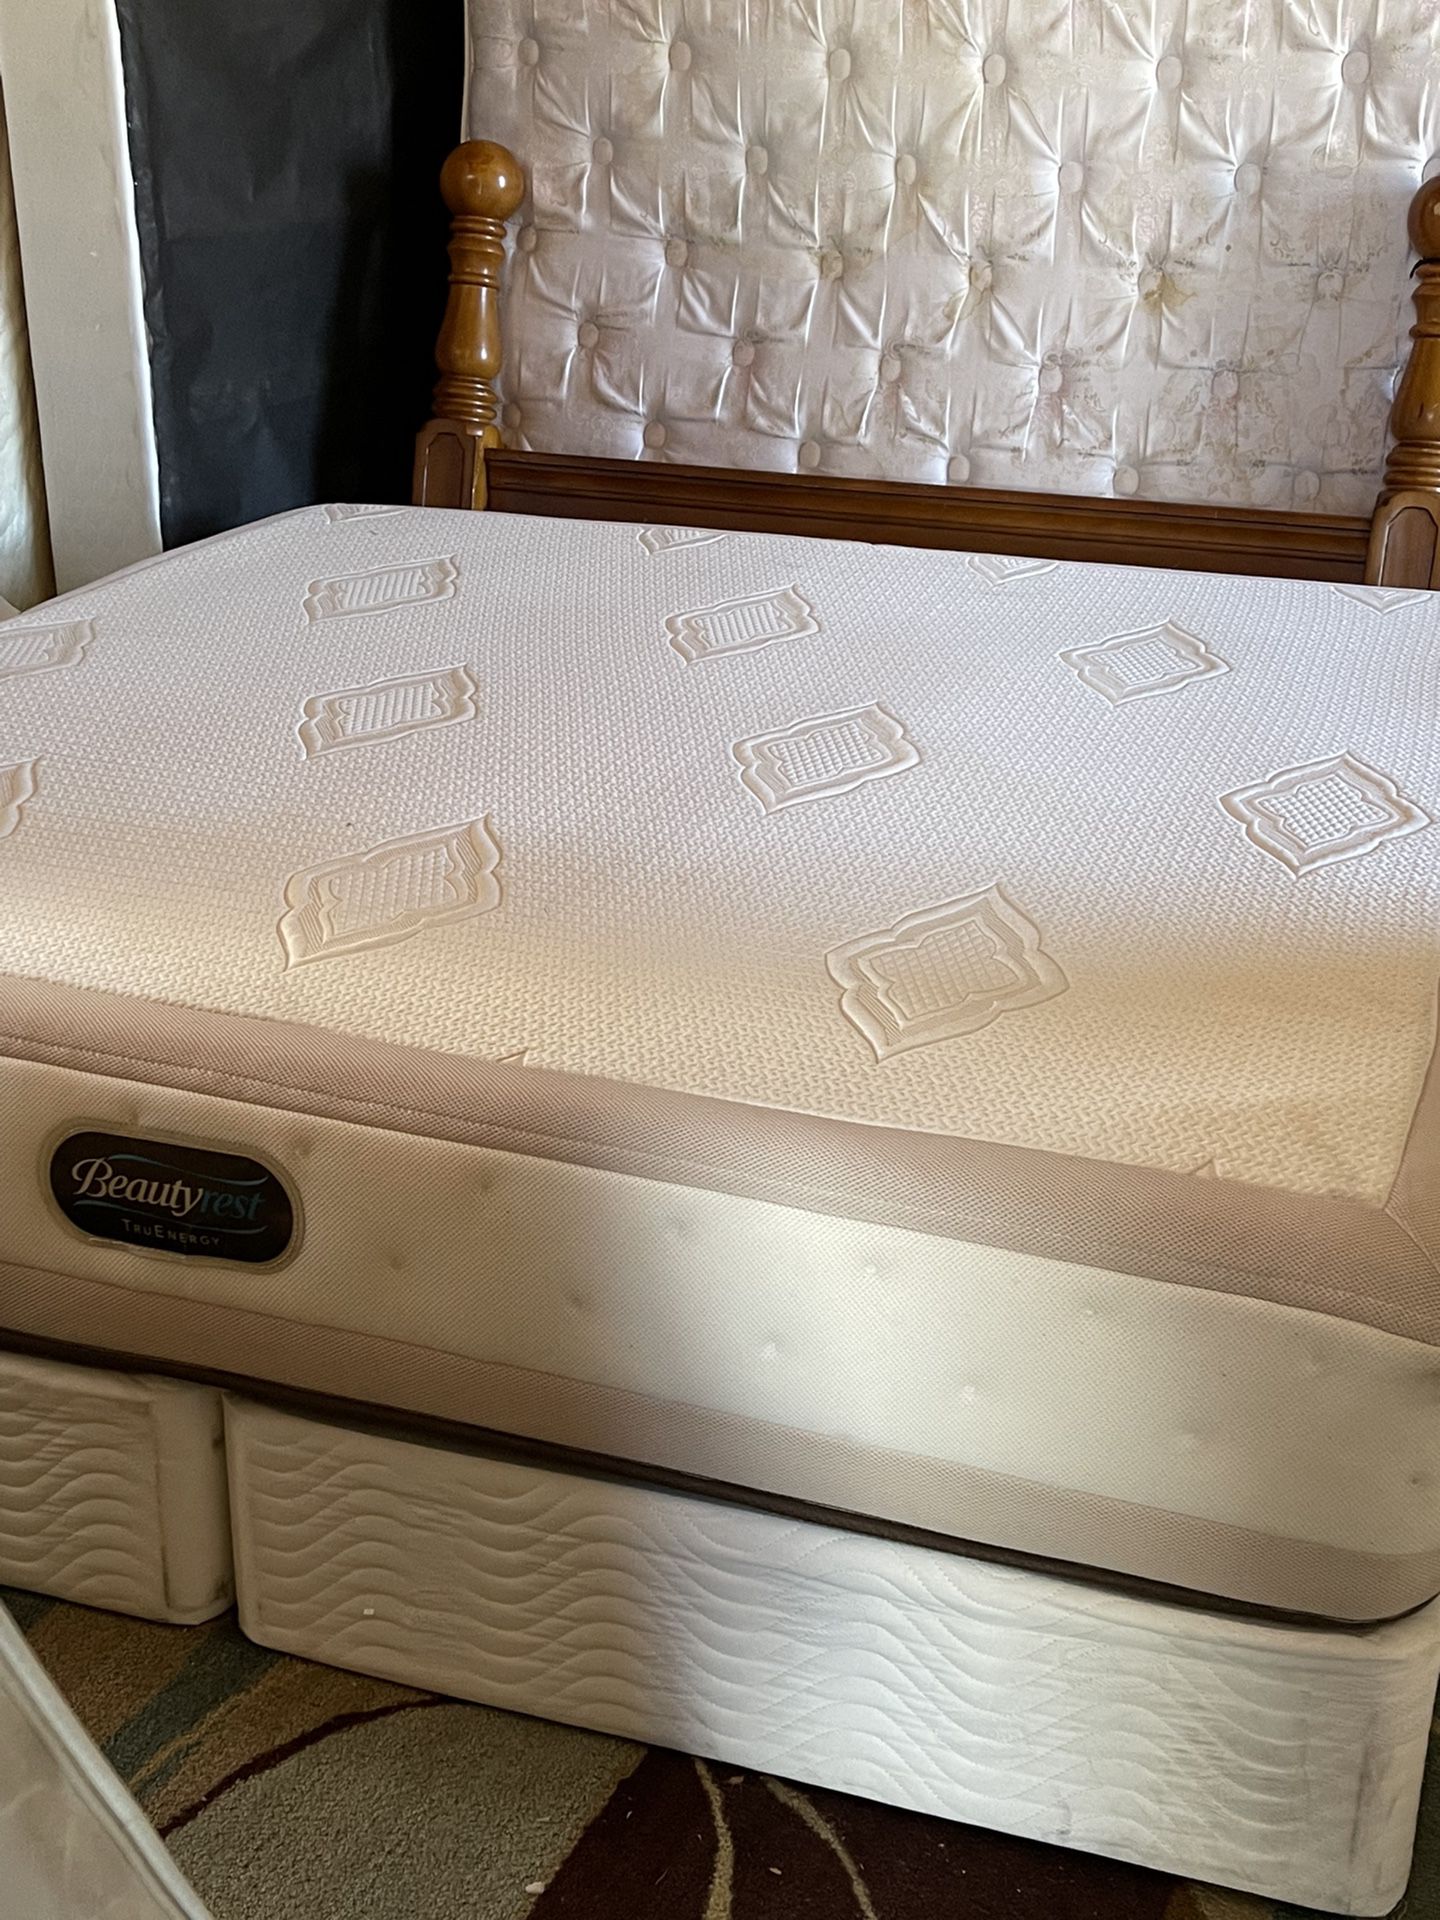 USED KING SIZE BEAUTYREST HYBRID MATTRESS WITH BOX SPRING